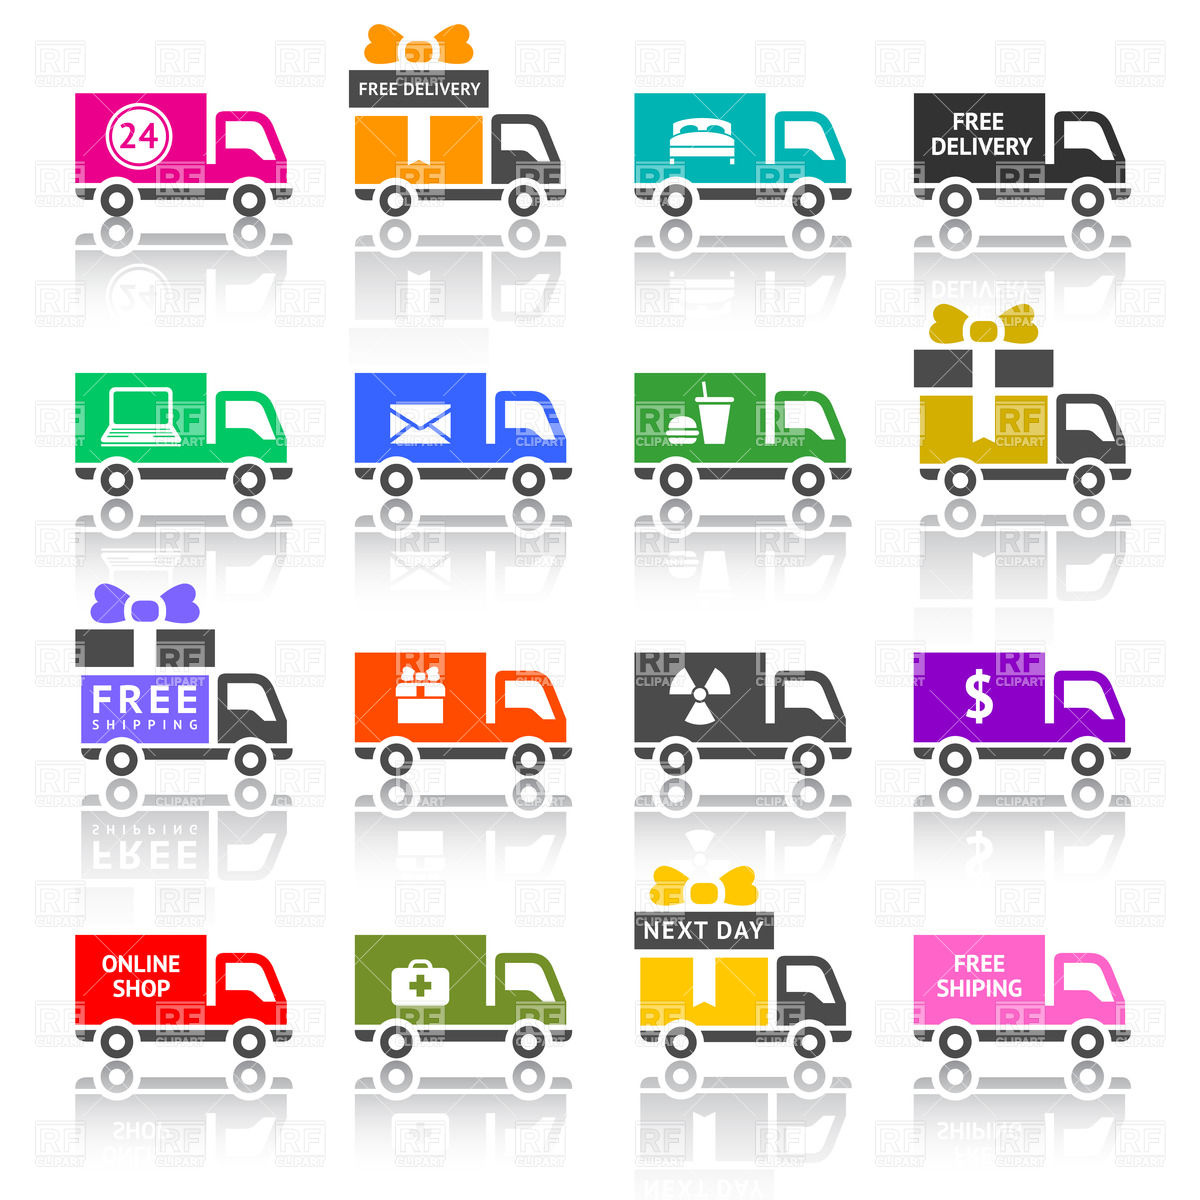 Delivery Van And Conveyance Lorry   Icon Set 18133 Download Royalty